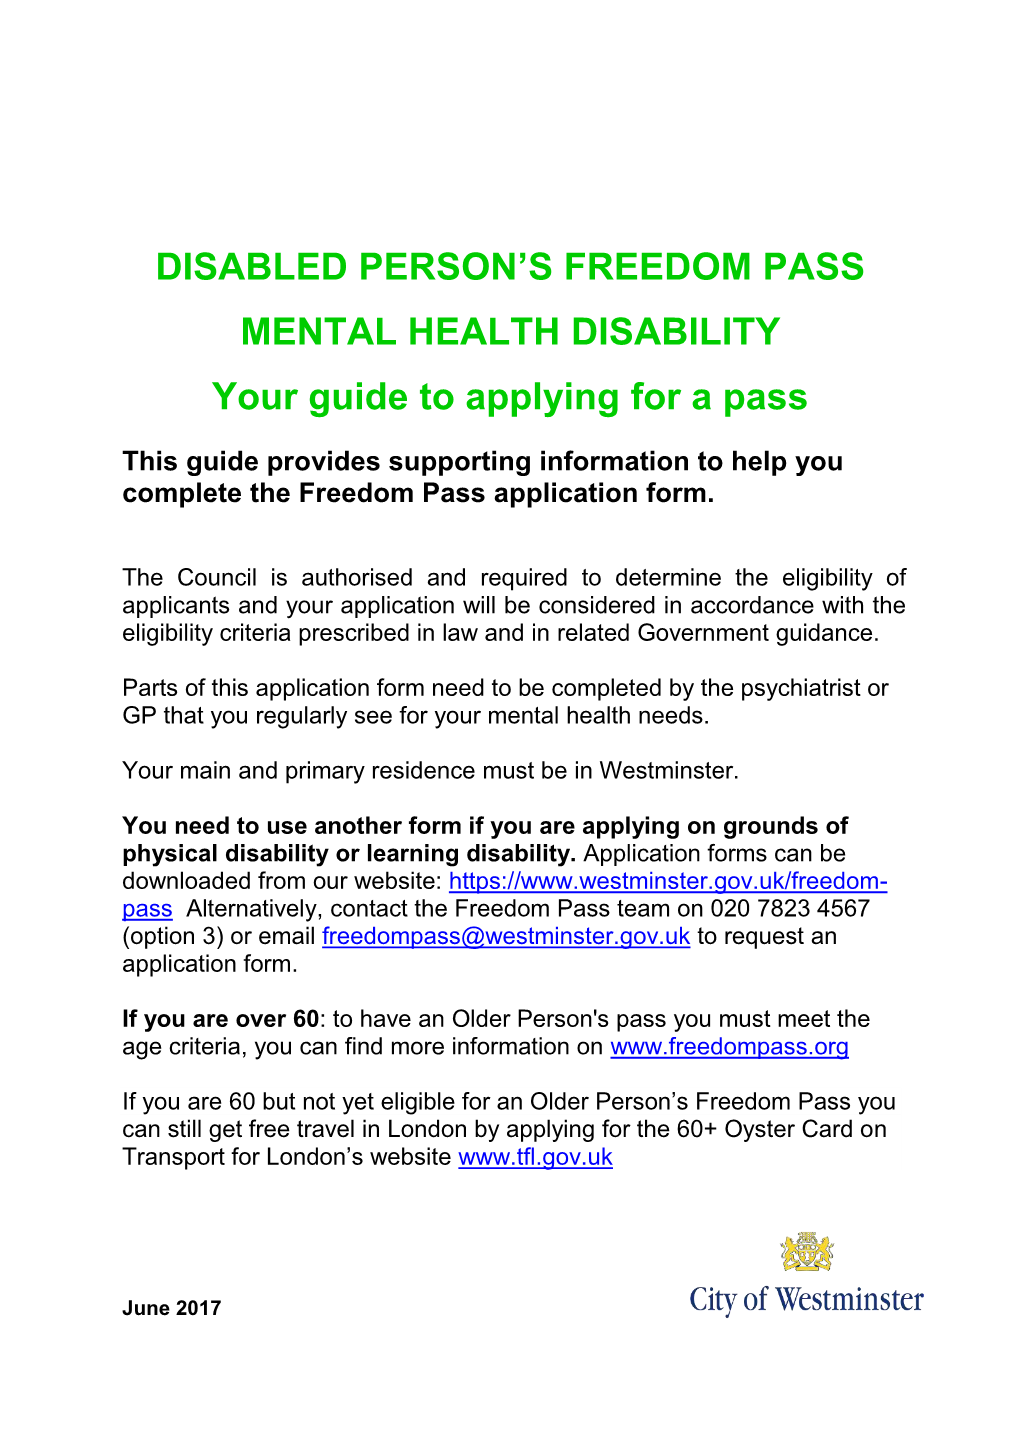 Disabled Person's Freedom Pass Mental Health